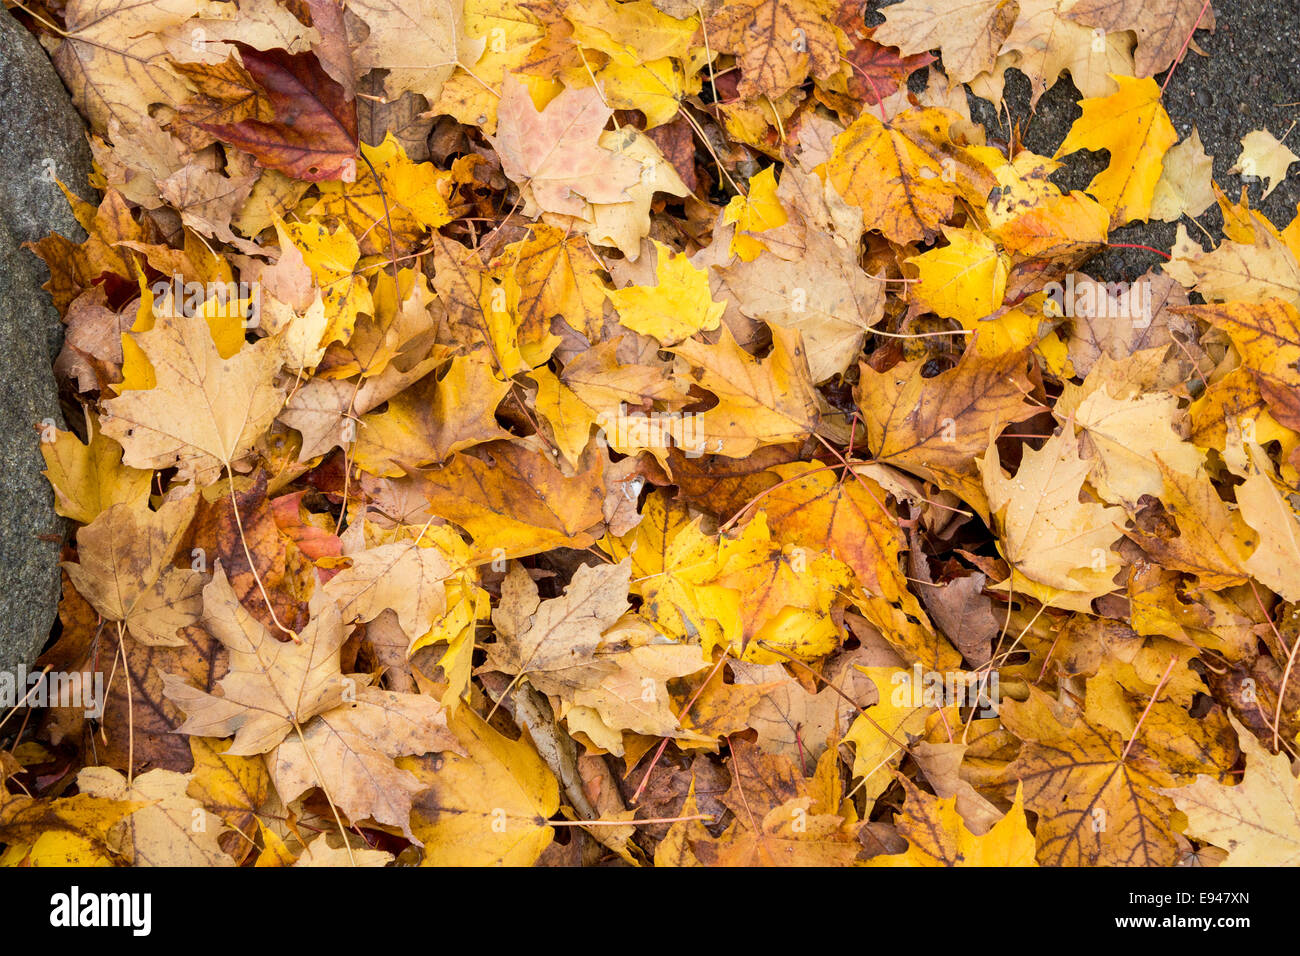 A blanket of yellow and orange maple leaves cover the ground in fall. Stock Photo